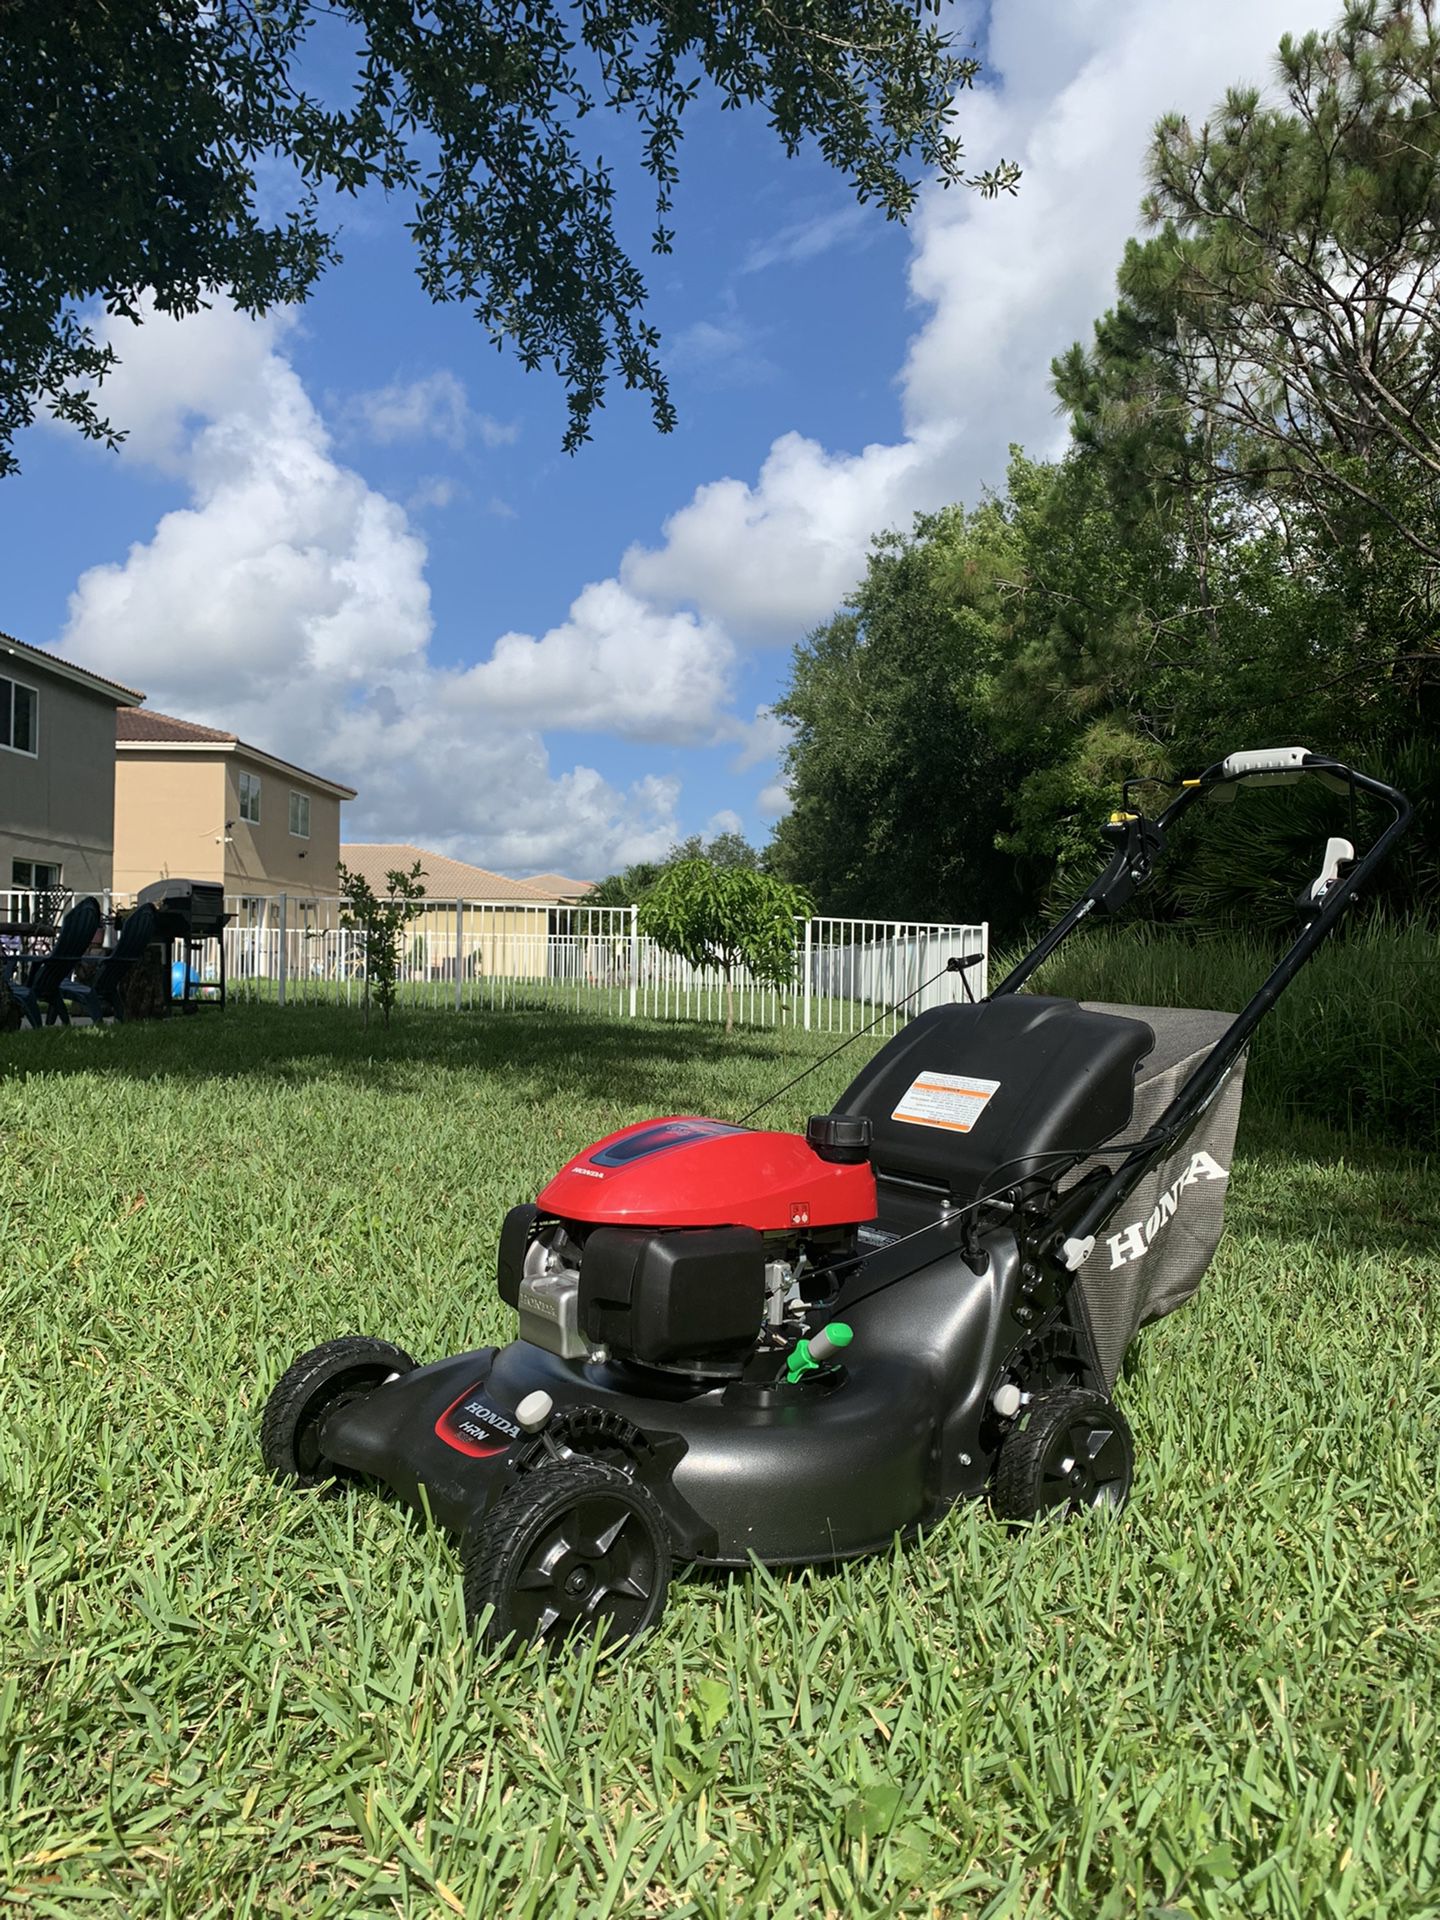 Like New Honda HRN216 Lawn Mower With Blade Stop 